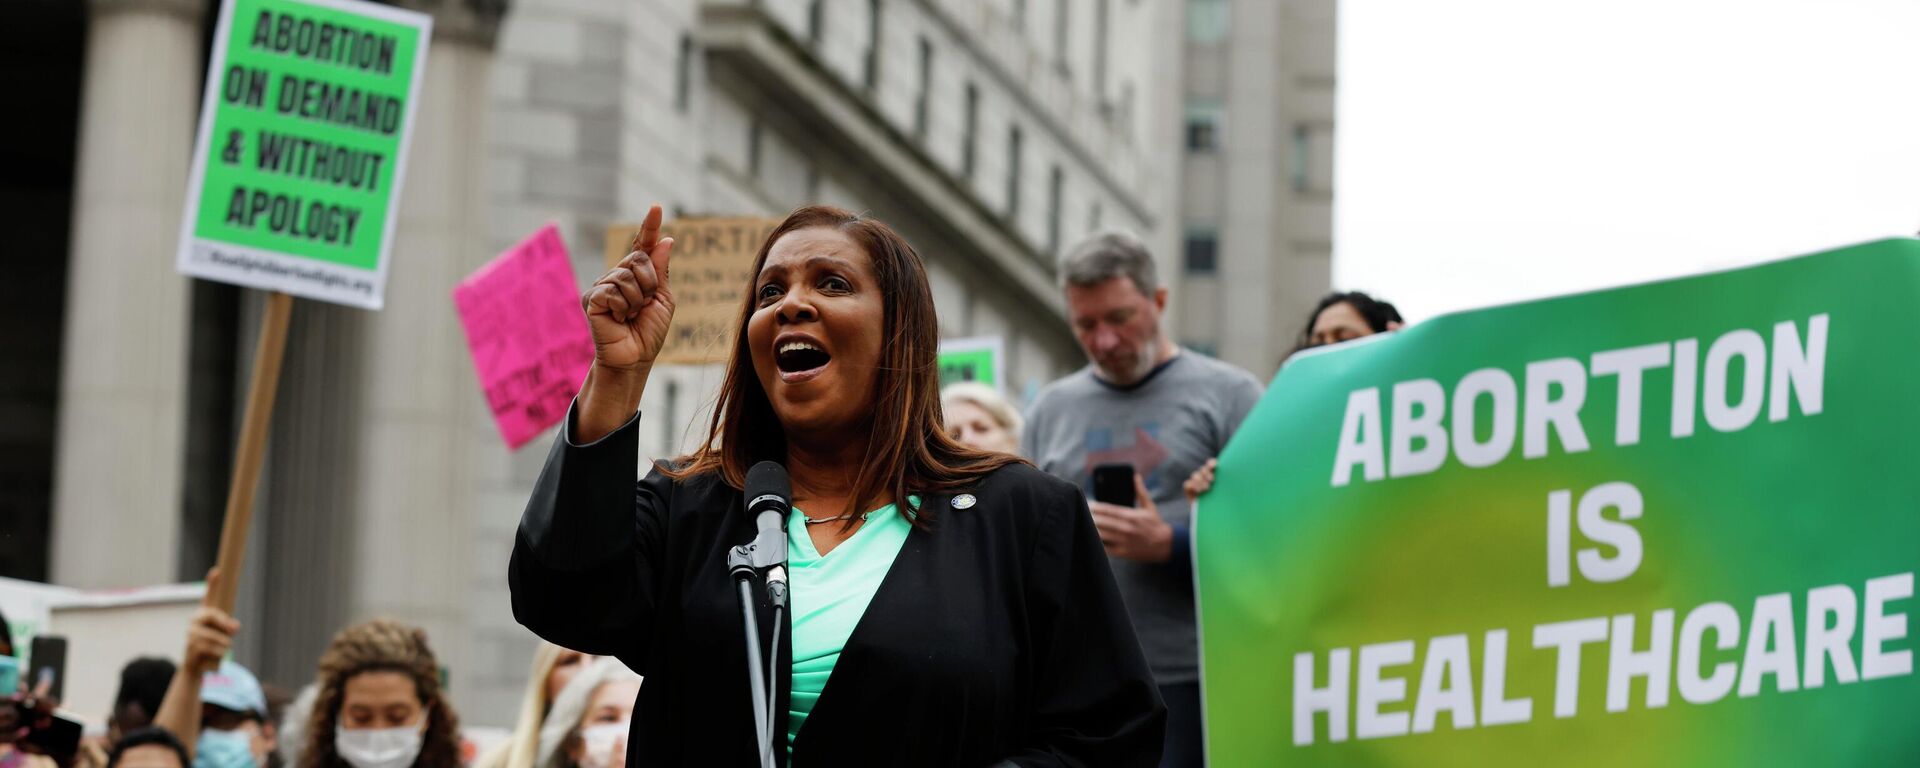 New York Attorney General Letitia James speaks at a rally in support of abortion rights, Tuesday, May 3, 2022, in New York. - Sputnik International, 1920, 02.06.2022